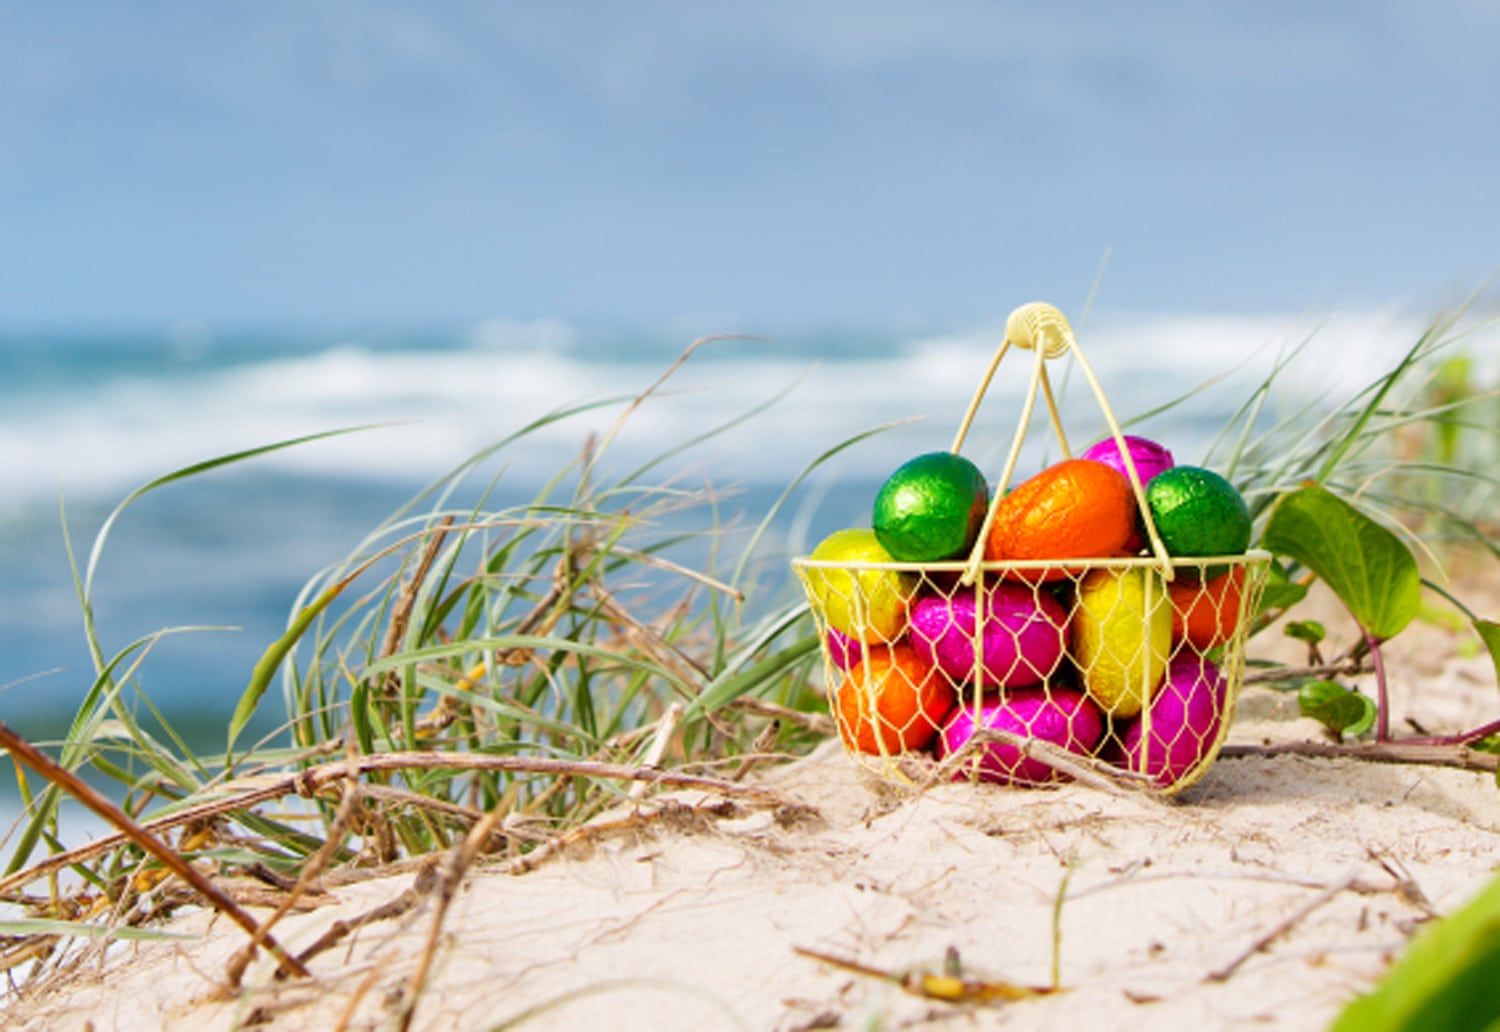 A Surf Trip Can Be a Real Easter Egg Hunt